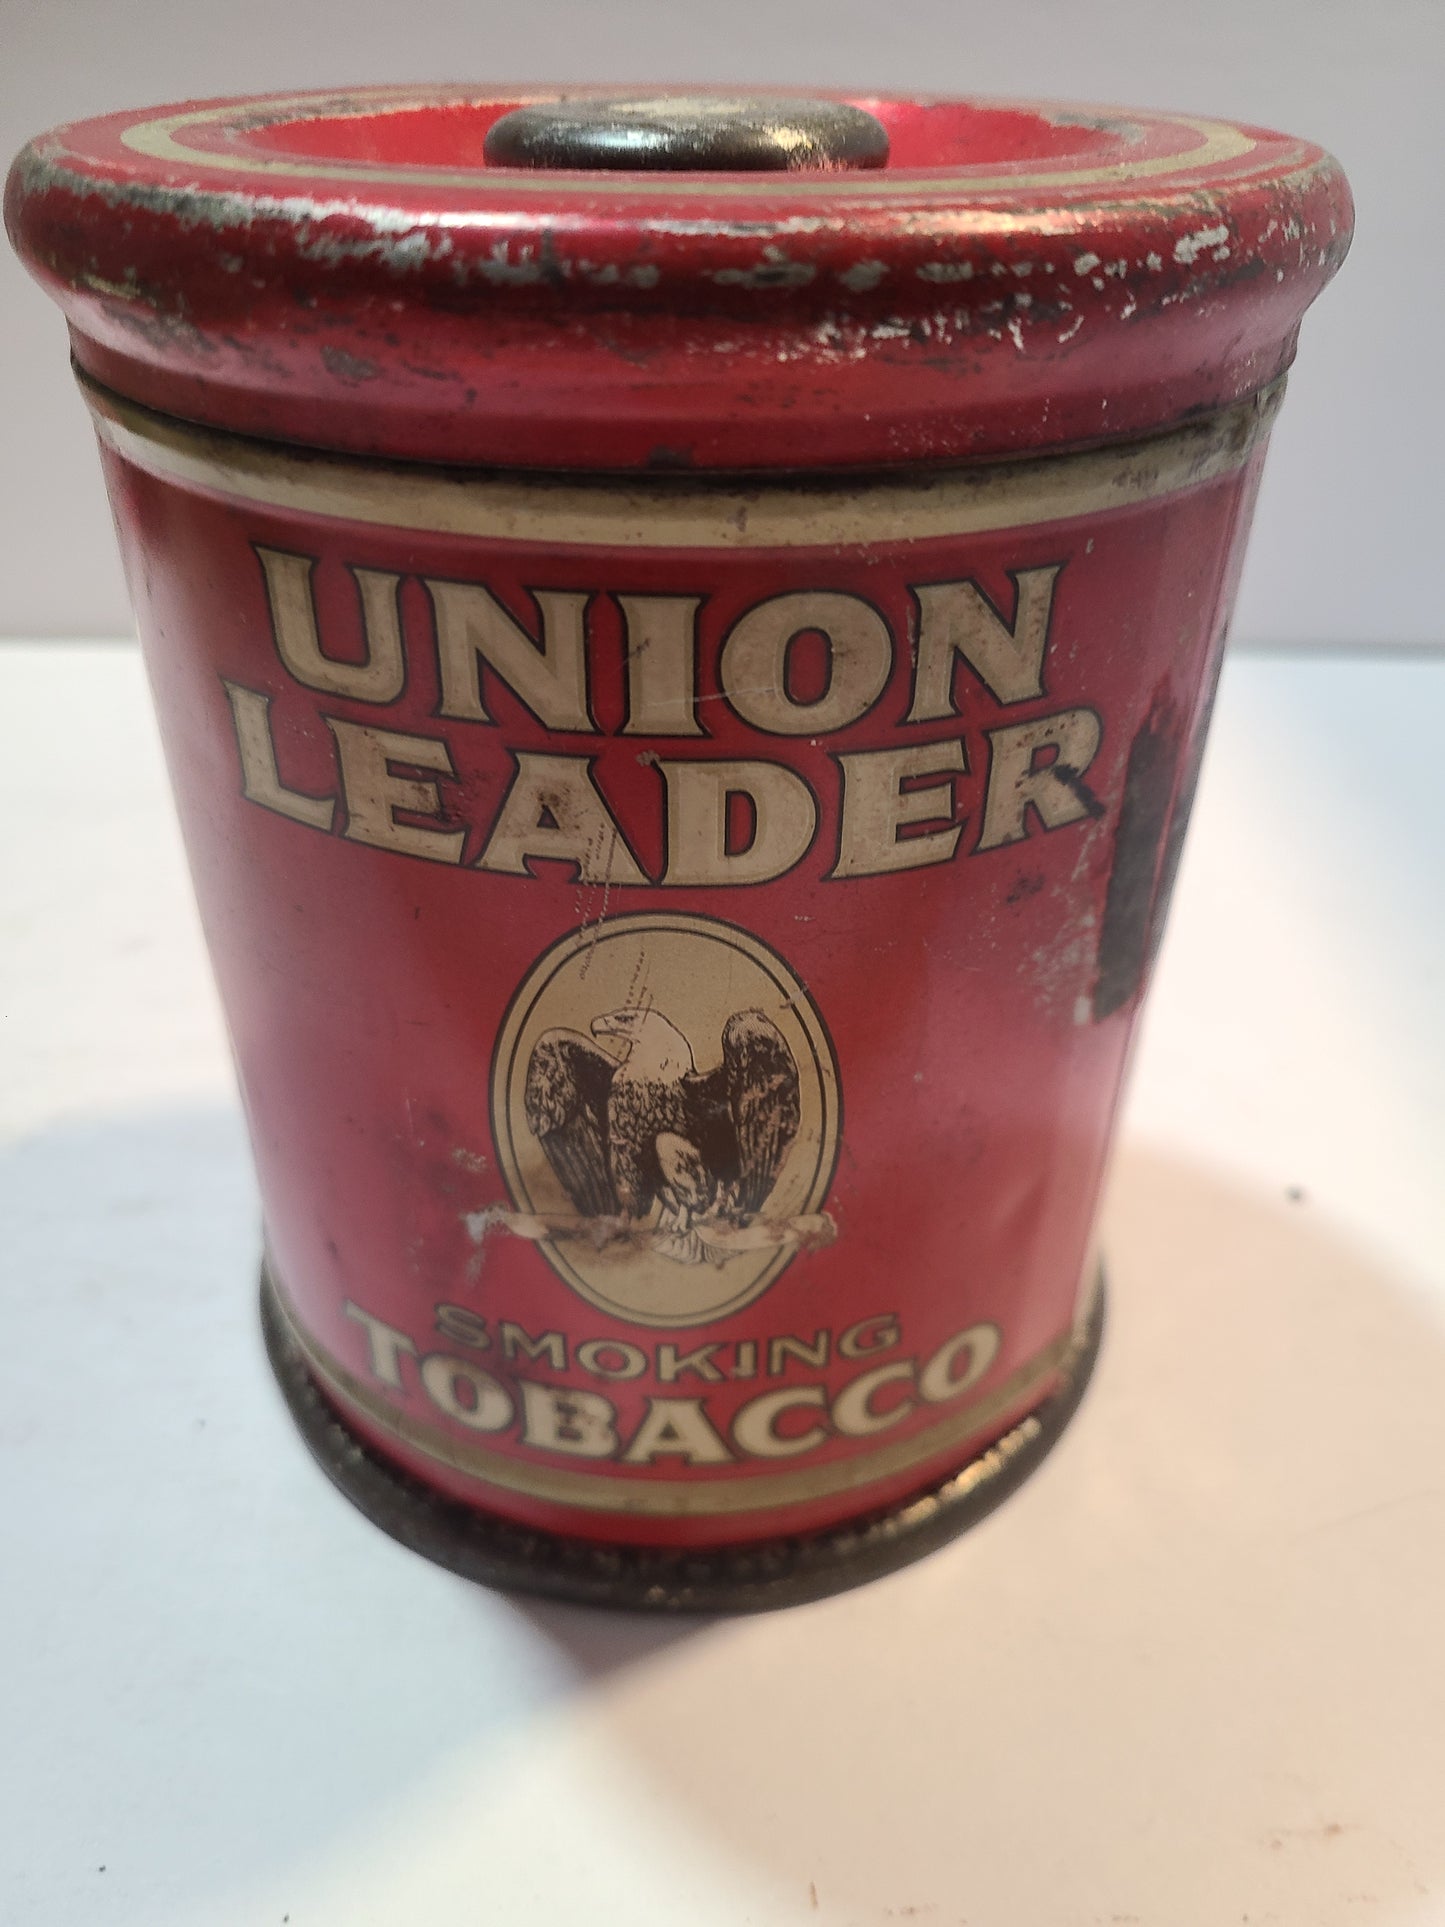 Vintage Union Leaders tobacco can